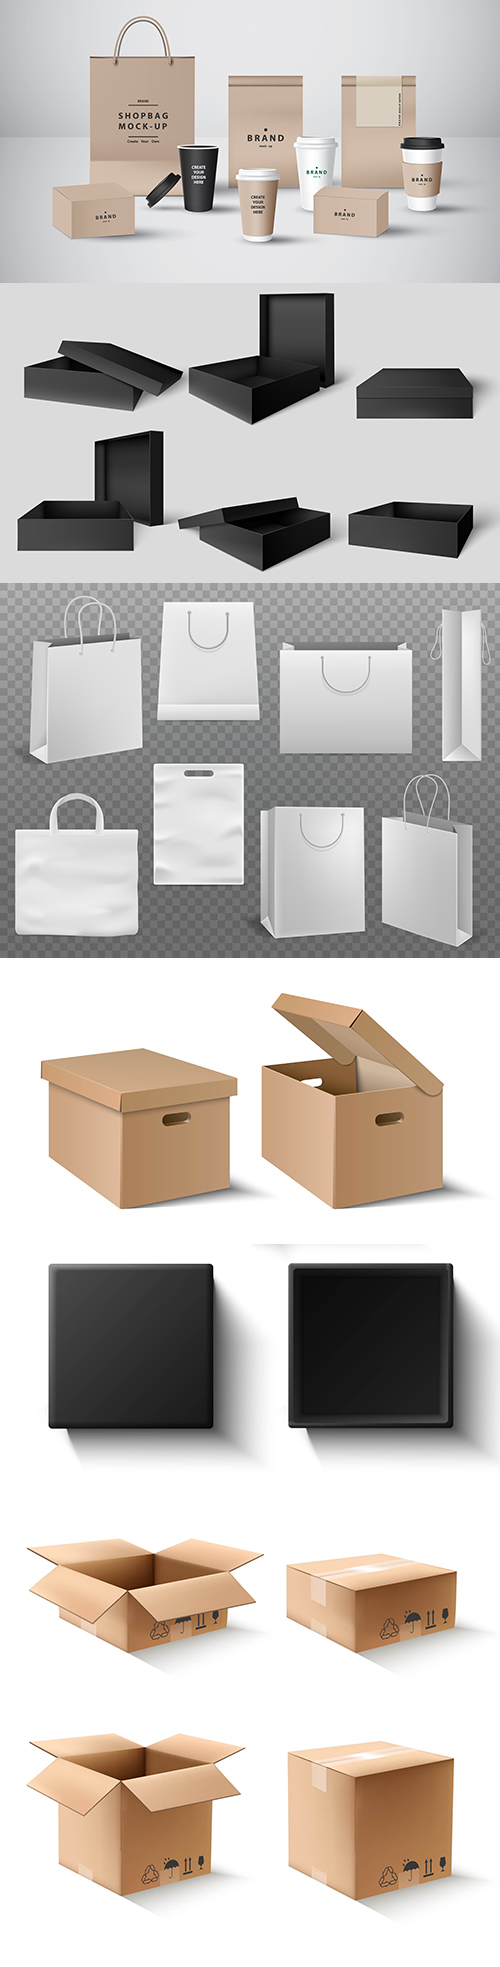 Cardboard box and packages for purchase of goods and products
